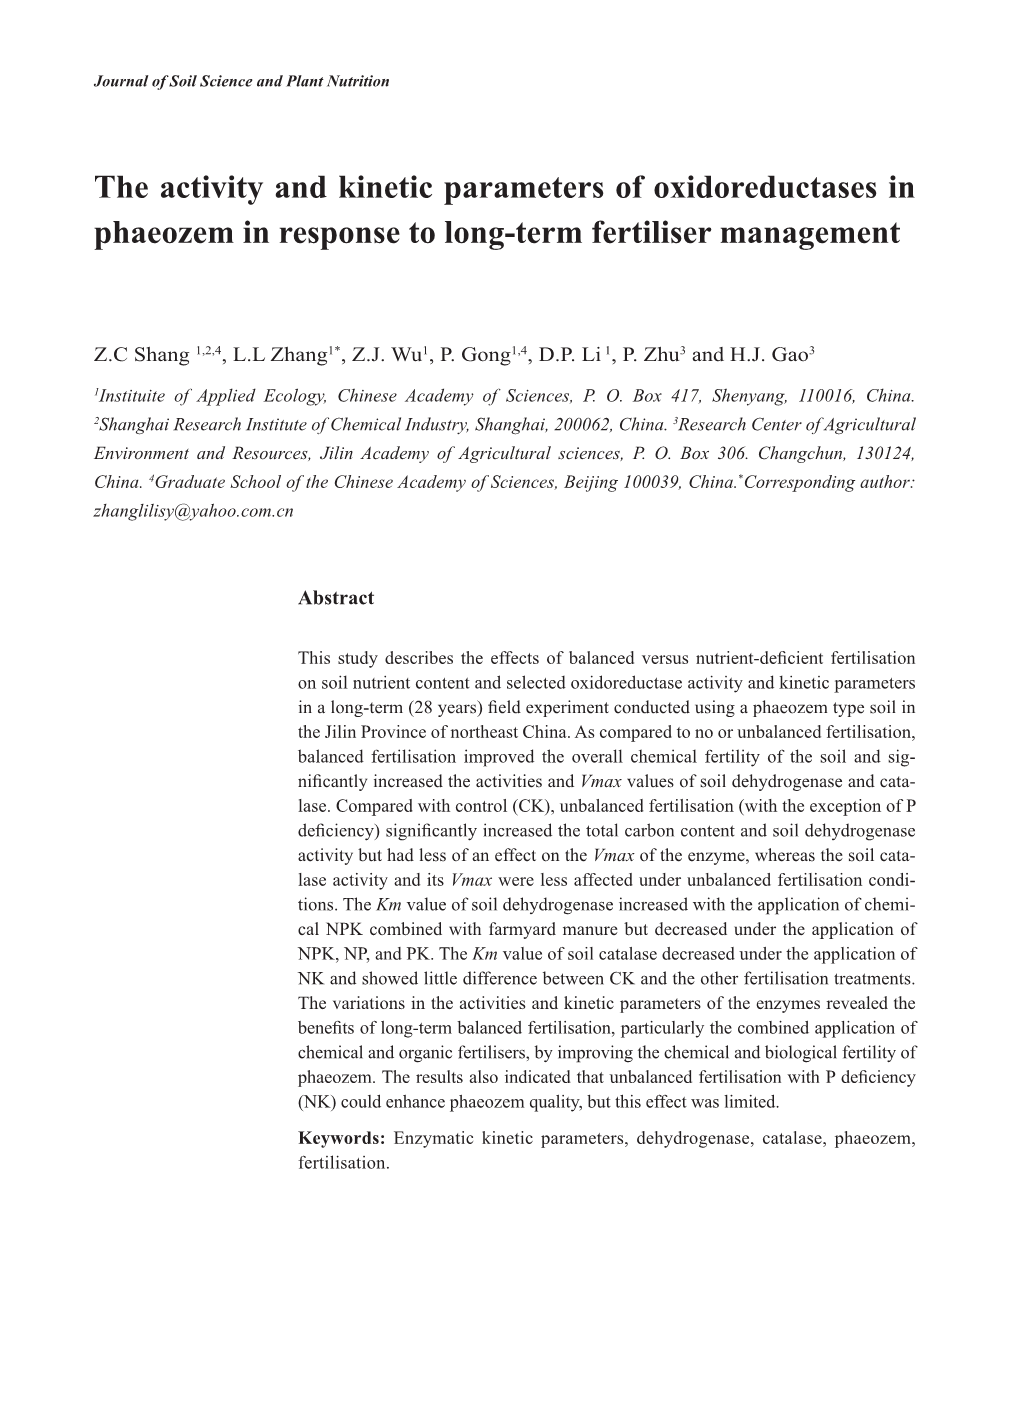 The Activity and Kinetic Parameters of Oxidoreductases in Phaeozem in Response to Long-Term Fertiliser Management